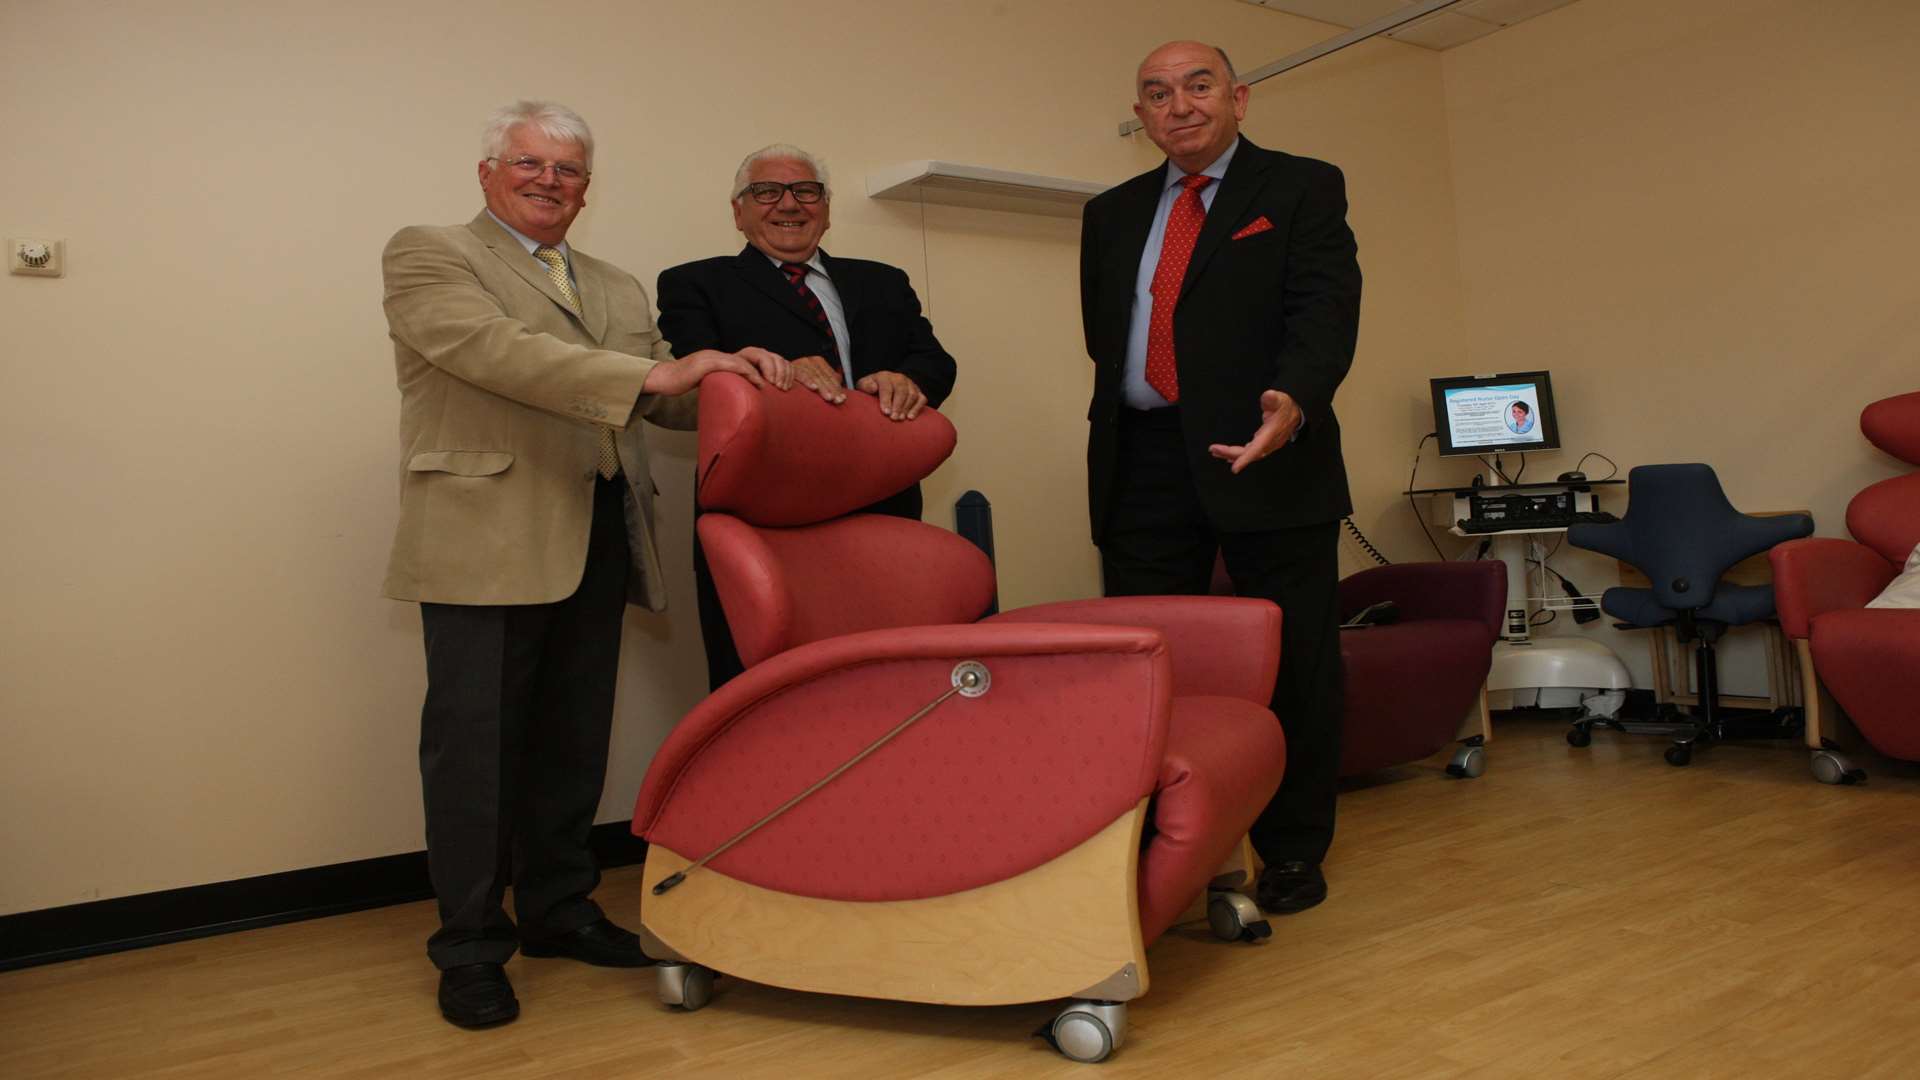 From left, Brendan Casey, TJ McDonagh, former cancer patient, and Mike Fitzpatrick with the specialist chairs at Darent Valley Hospital